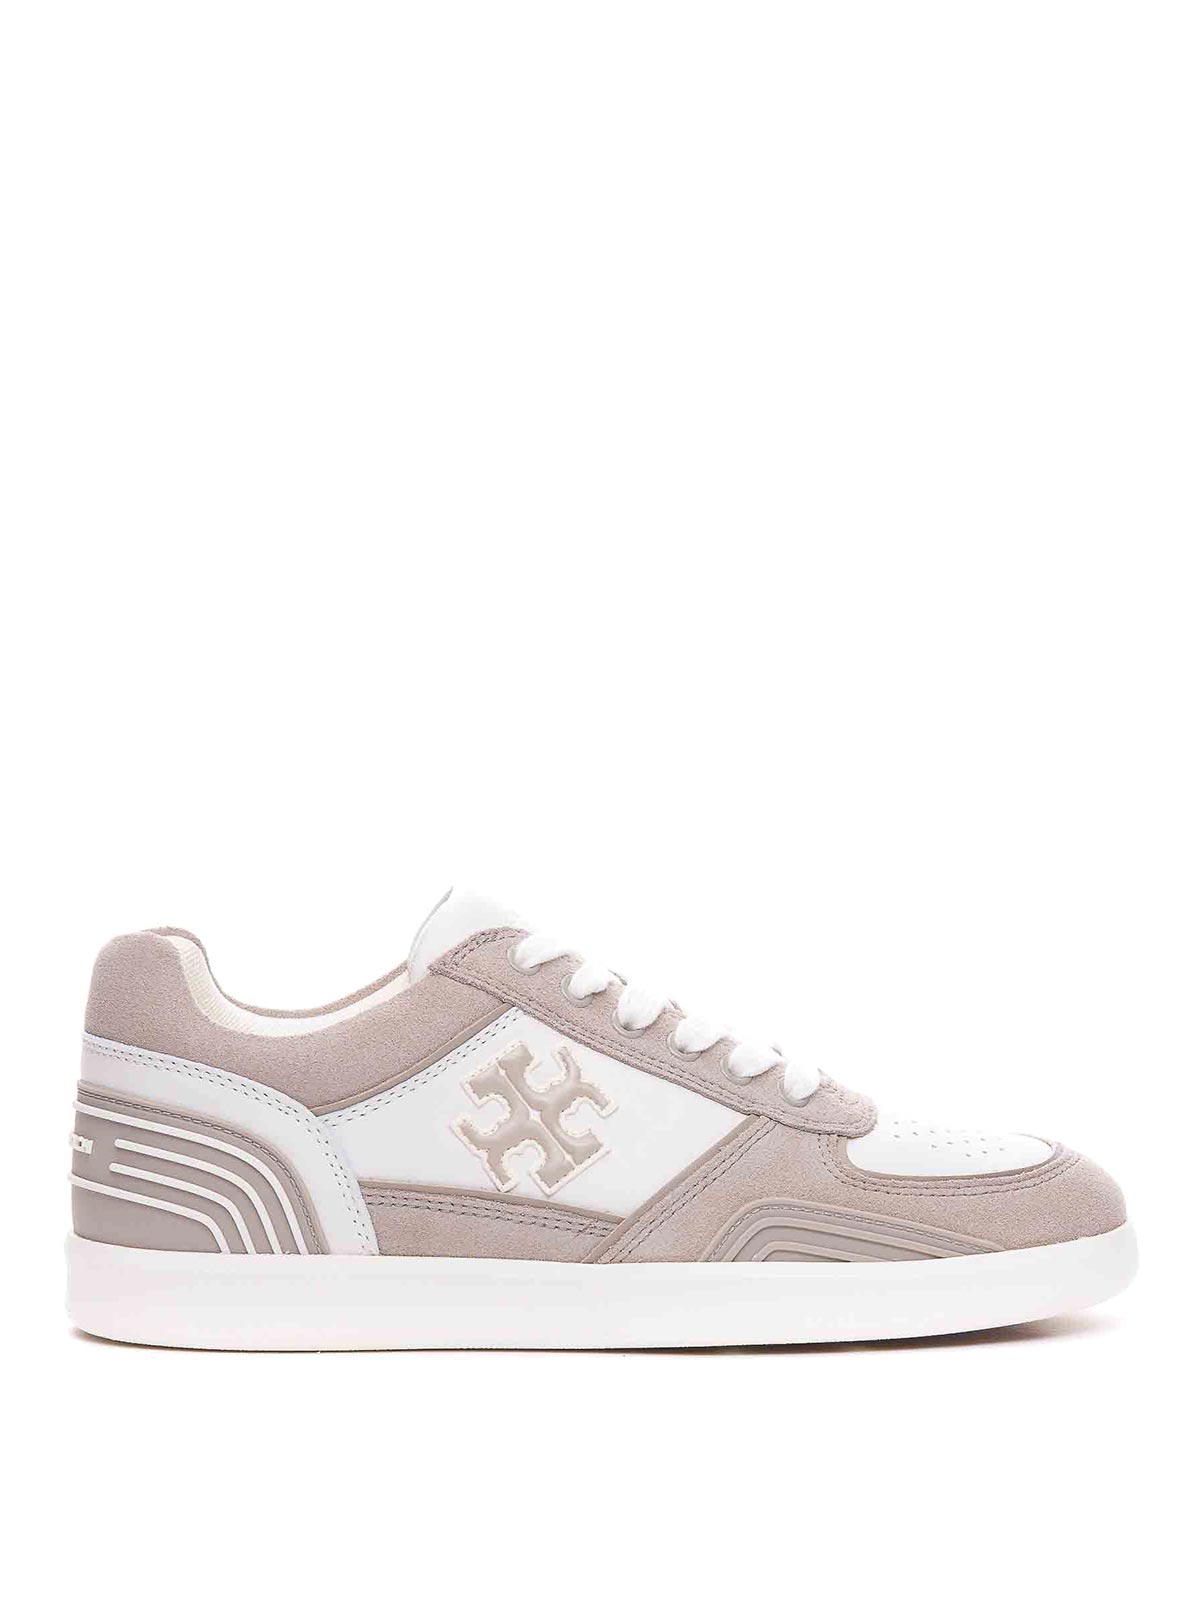 Tory Burch Clover Court Trainers In Beige